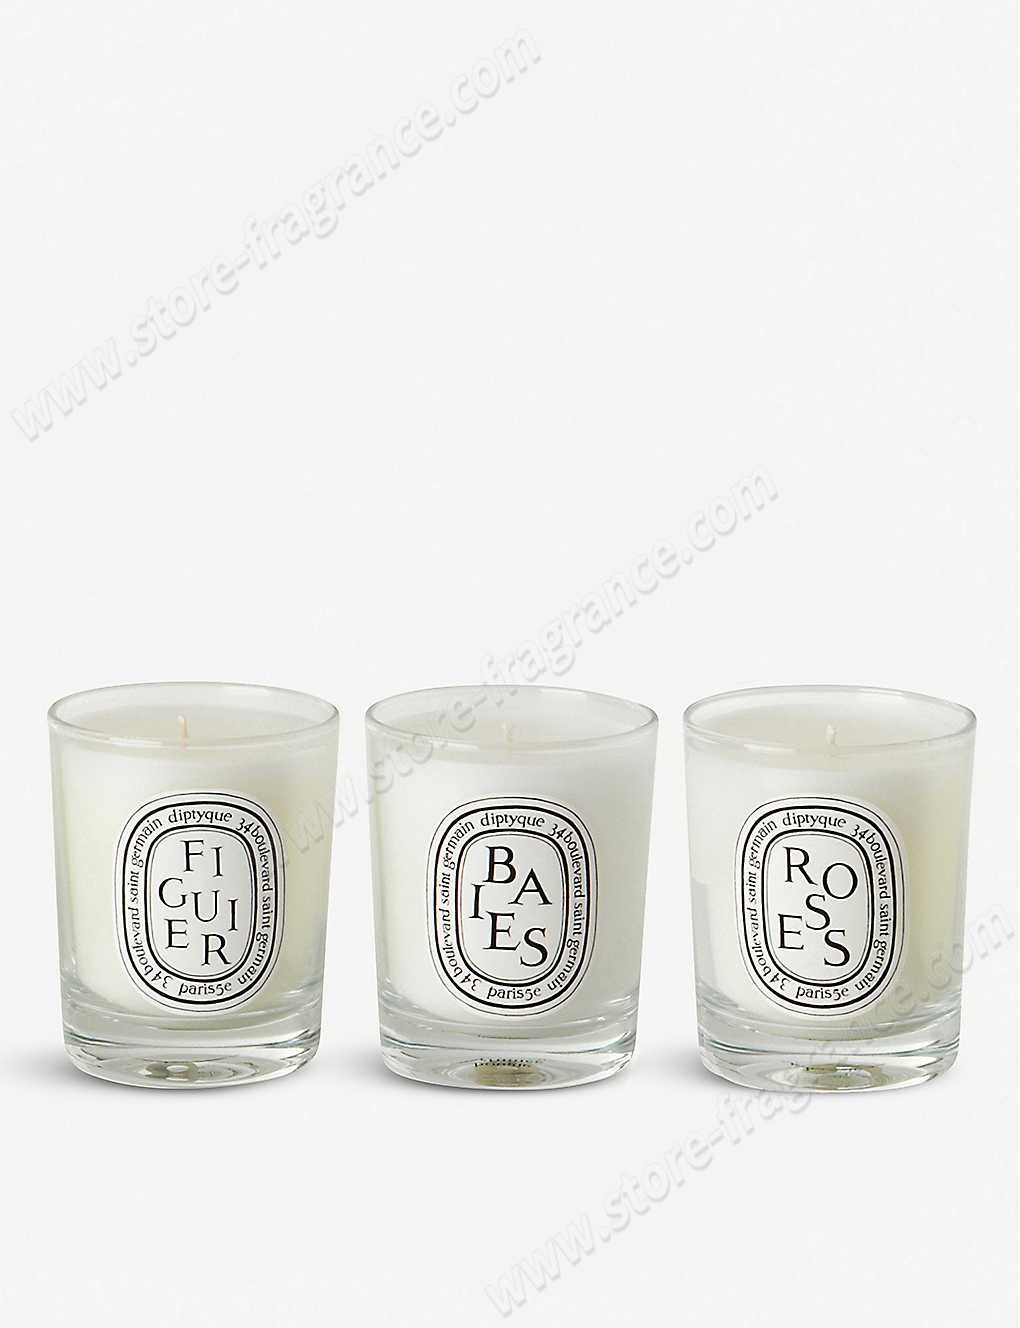 DIPTYQUE/Baies, Figuier and Roses mini candles 3 x 70g ✿ Discount Store - -1